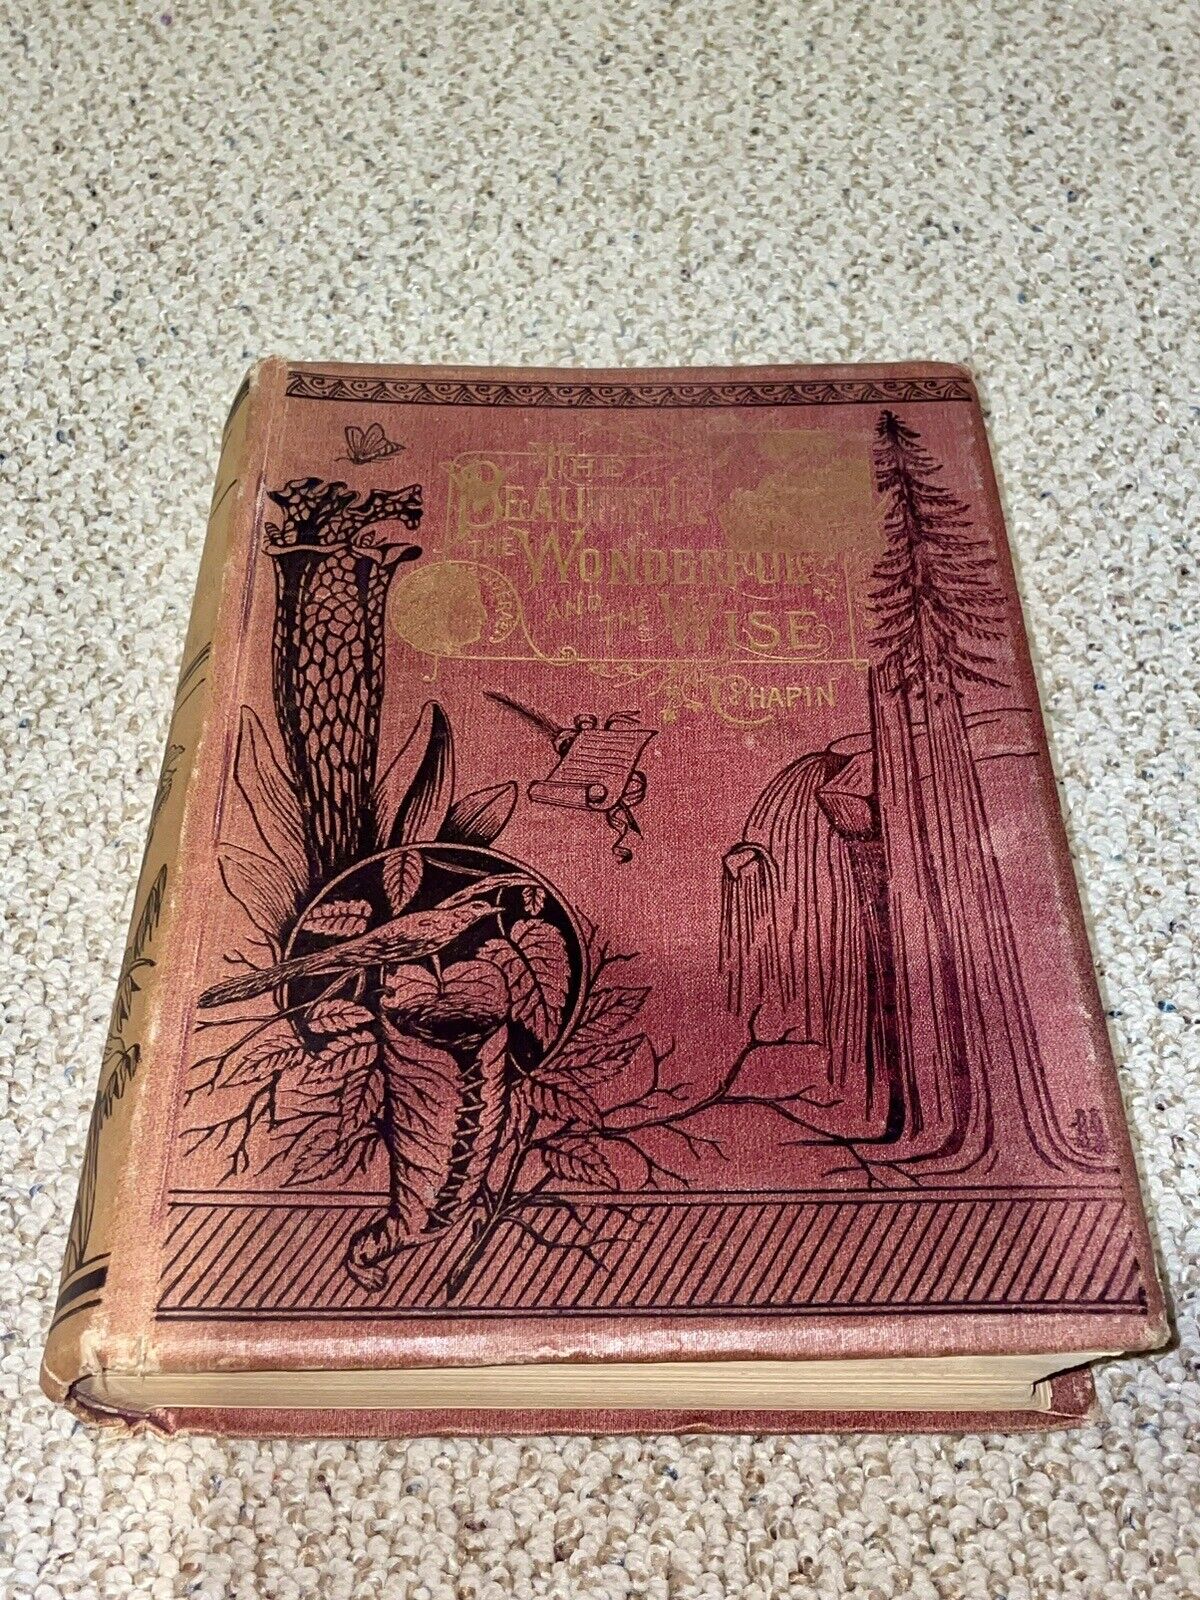 Antique 1885 Beautiful Wonderful Wise Poetic Literature Science Book by Chapin